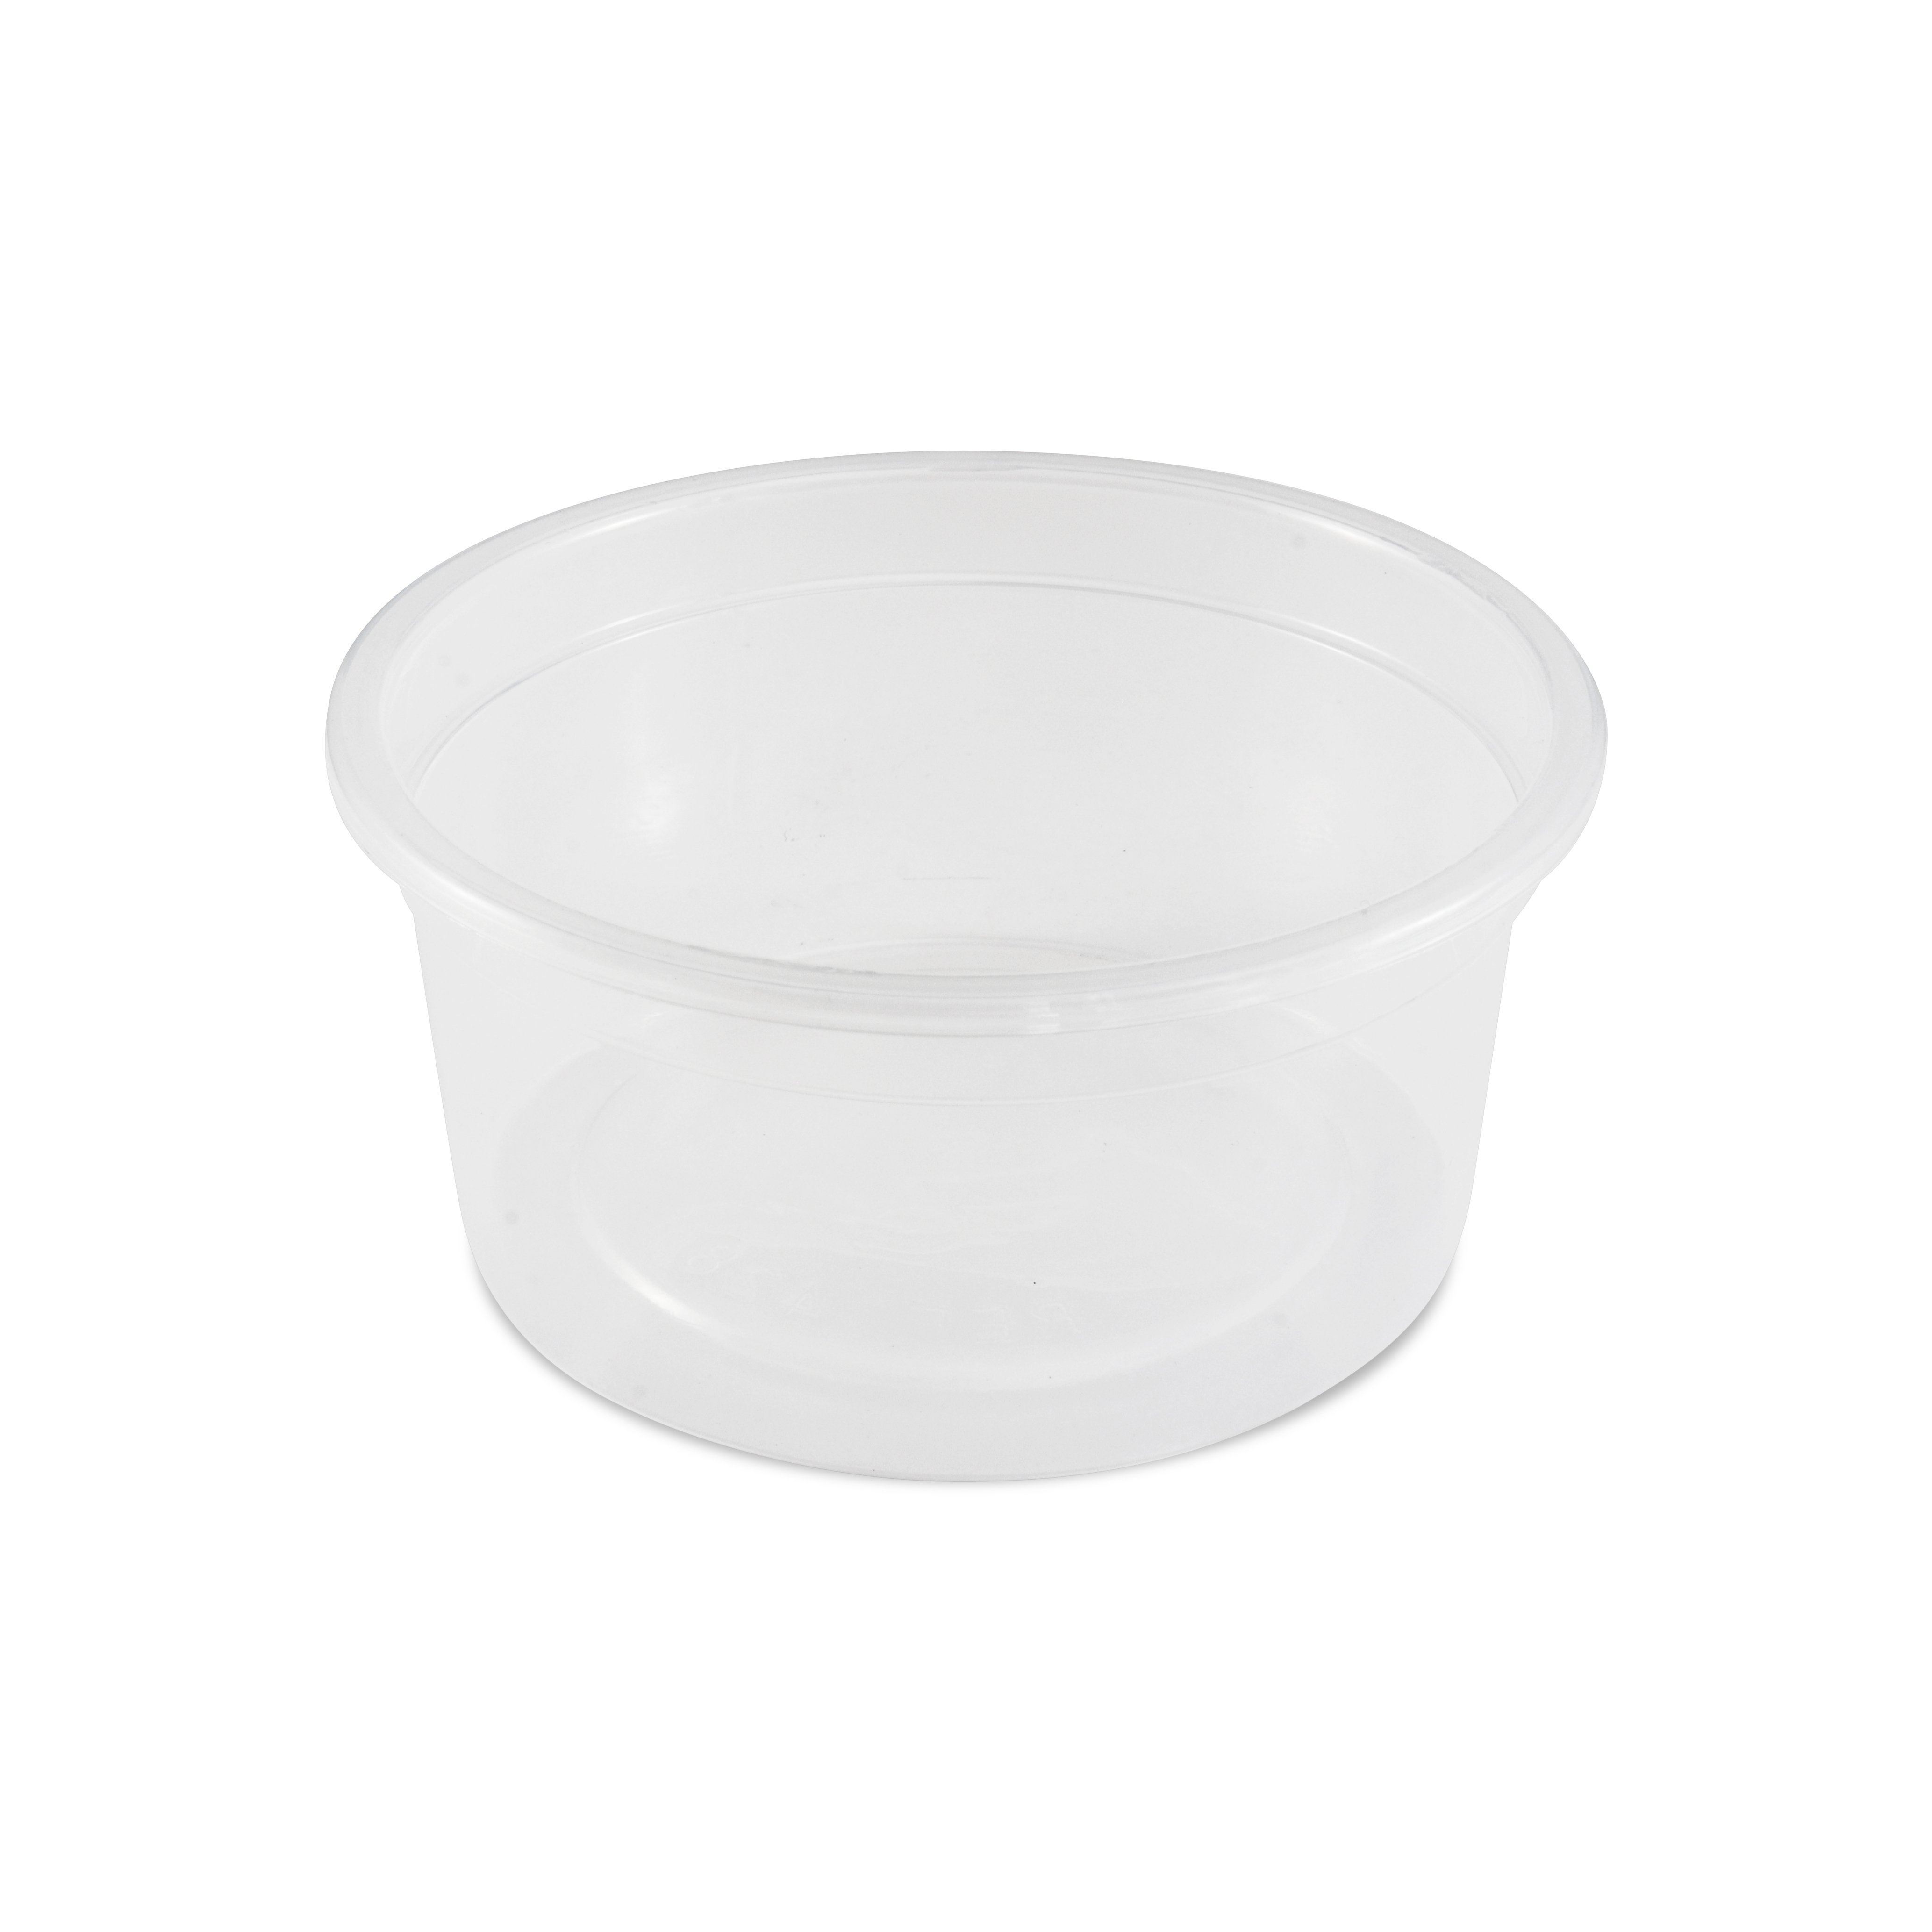 https://www.berryglobal.com/-/media/Berry/Images/Products/Berry-Global/150ml-95mm-Dessert-Cup-PP-13662290/150ml_clear_polyprop_cup_13662290.ashx